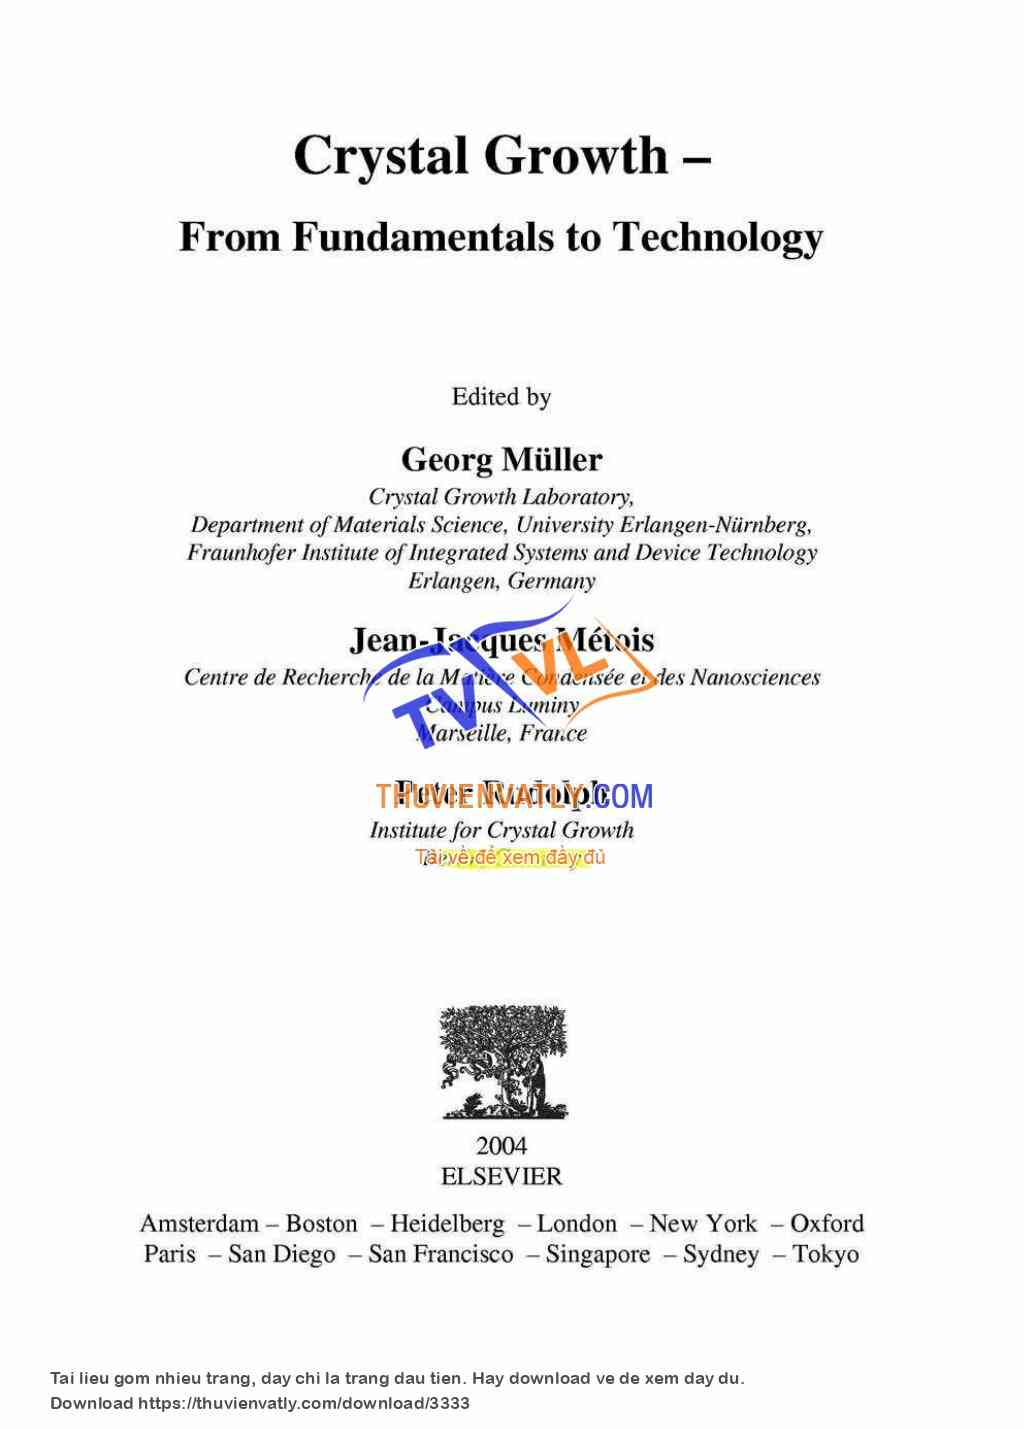 Crystal Growth - From Fundamentals to Technology